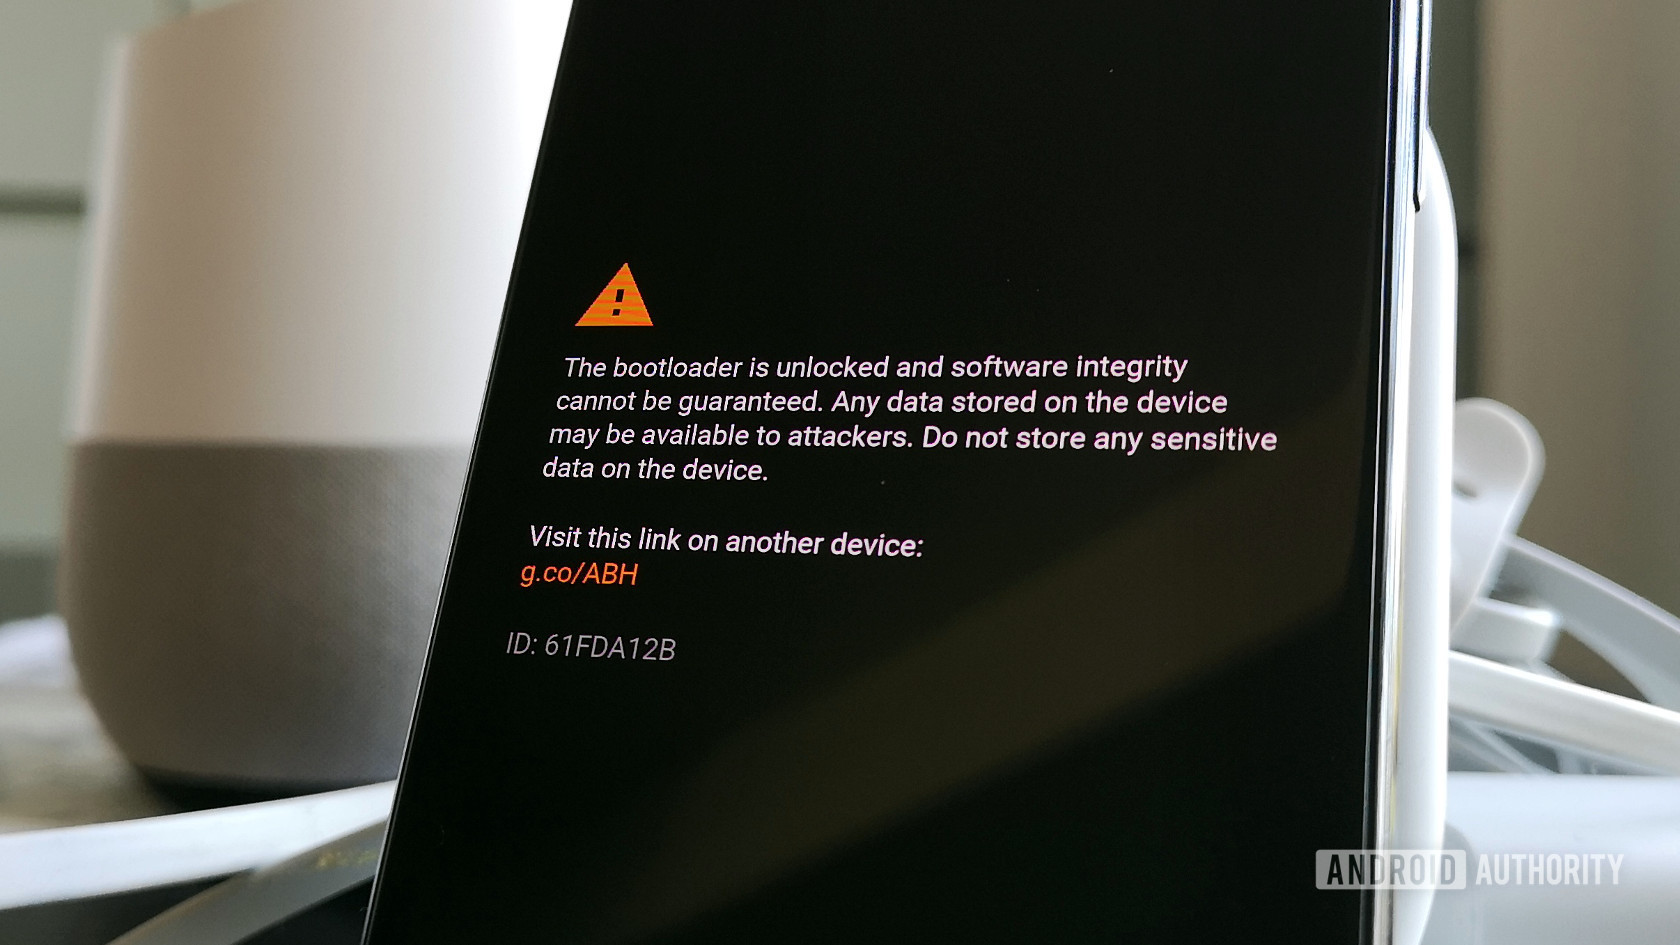 Warning message displayed once the Google Pixel 3 bootloader is unlocked